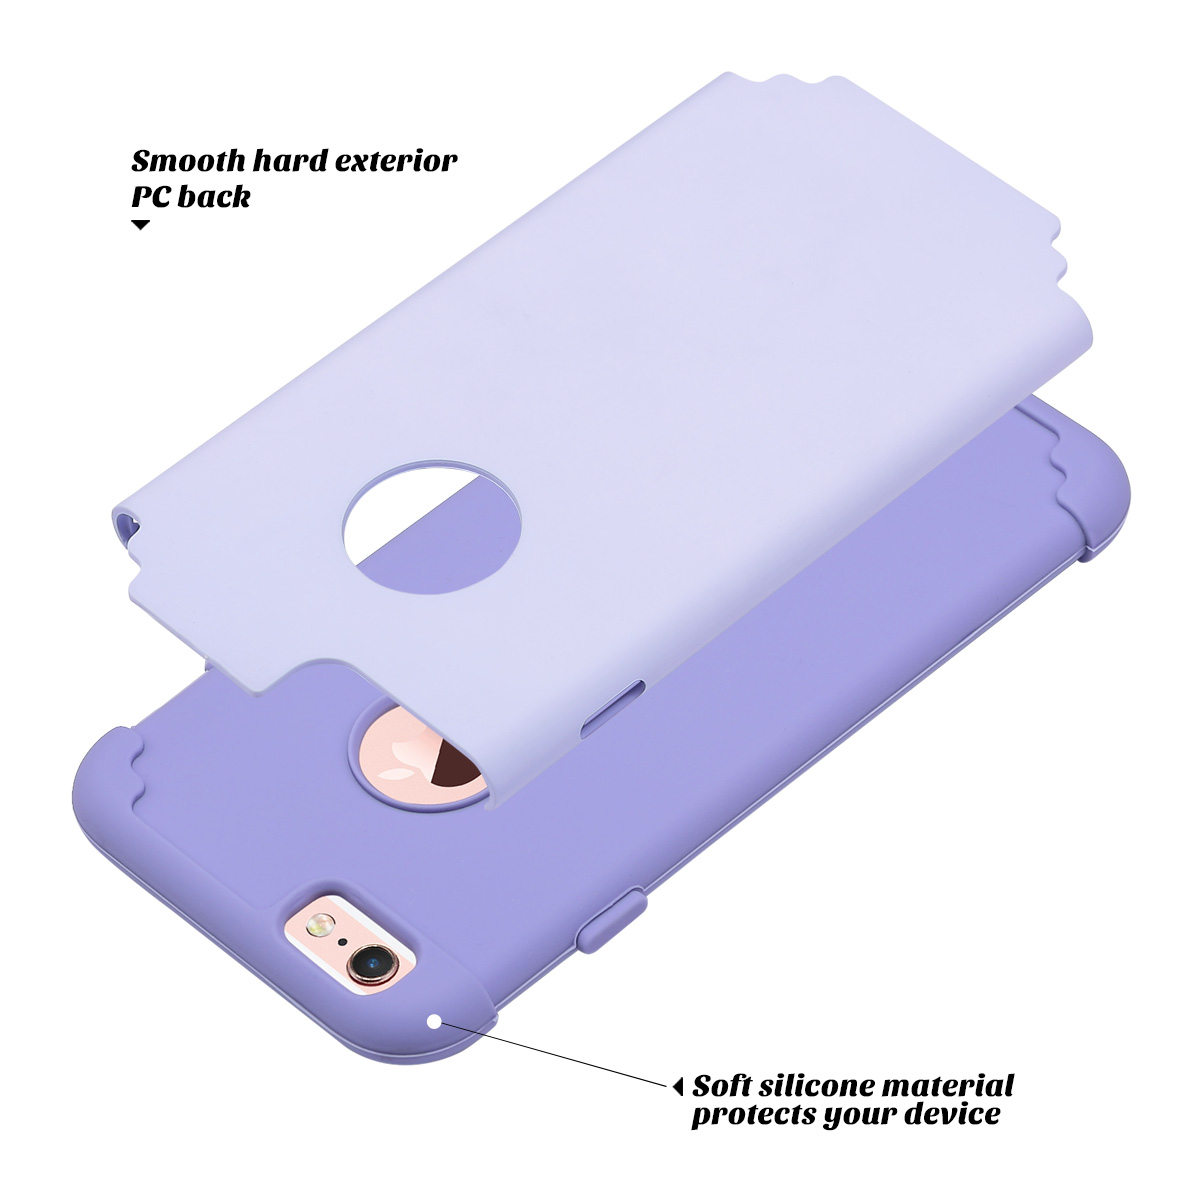 ULAK iPhone 6 Case, iPhone 6S Case, Slim Dual Layer Shockproof Bumper Phone Case for Apple iPhone 6 / 6s for Girls Women, Purple - image 2 of 8